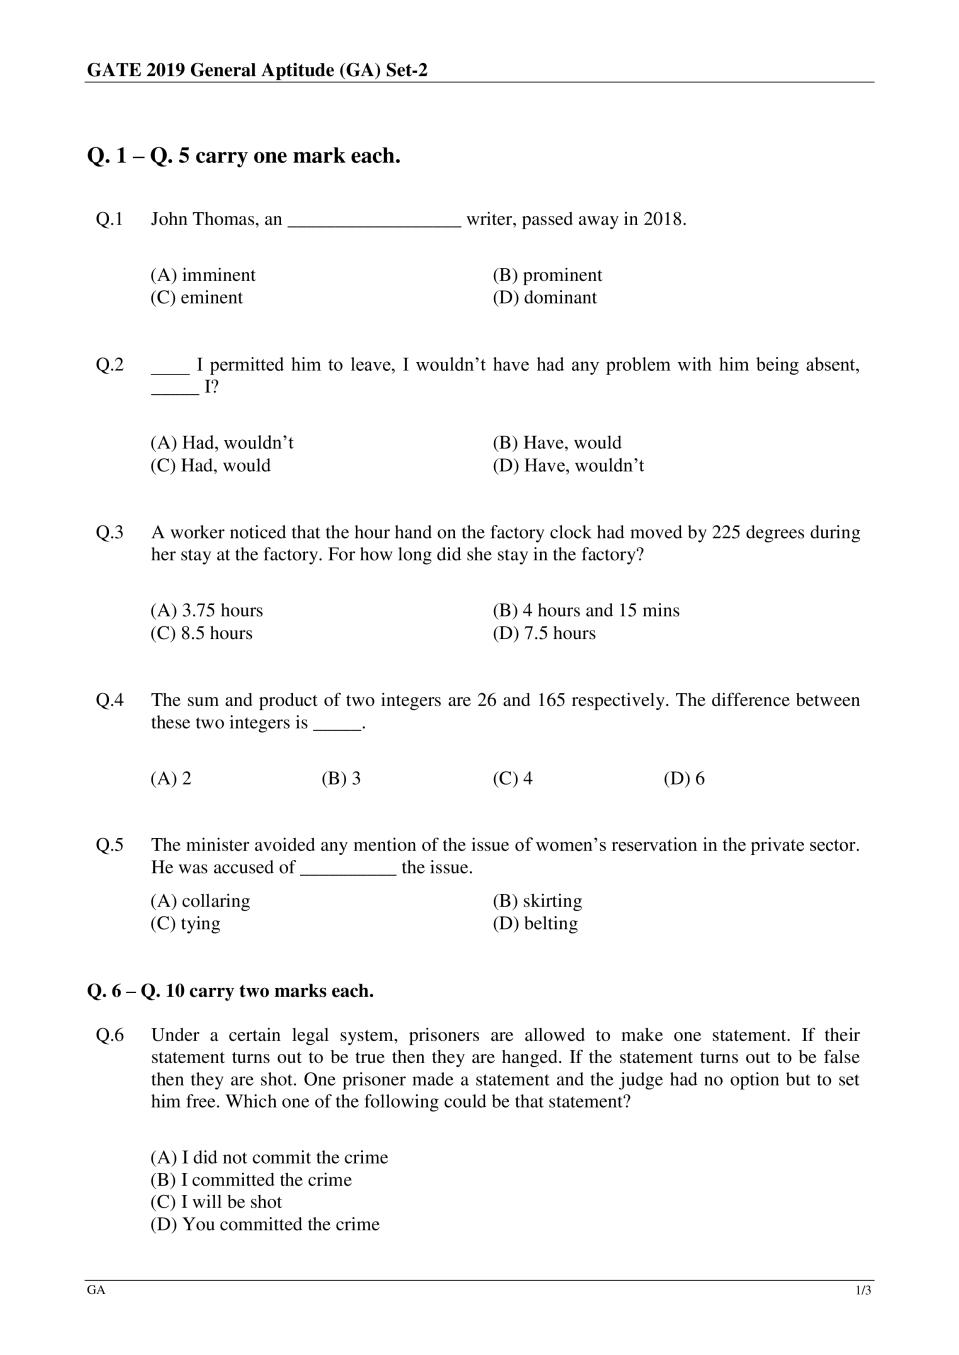 GATE 2019 Chemistry (CY) Question Paper with Answer - Page 1